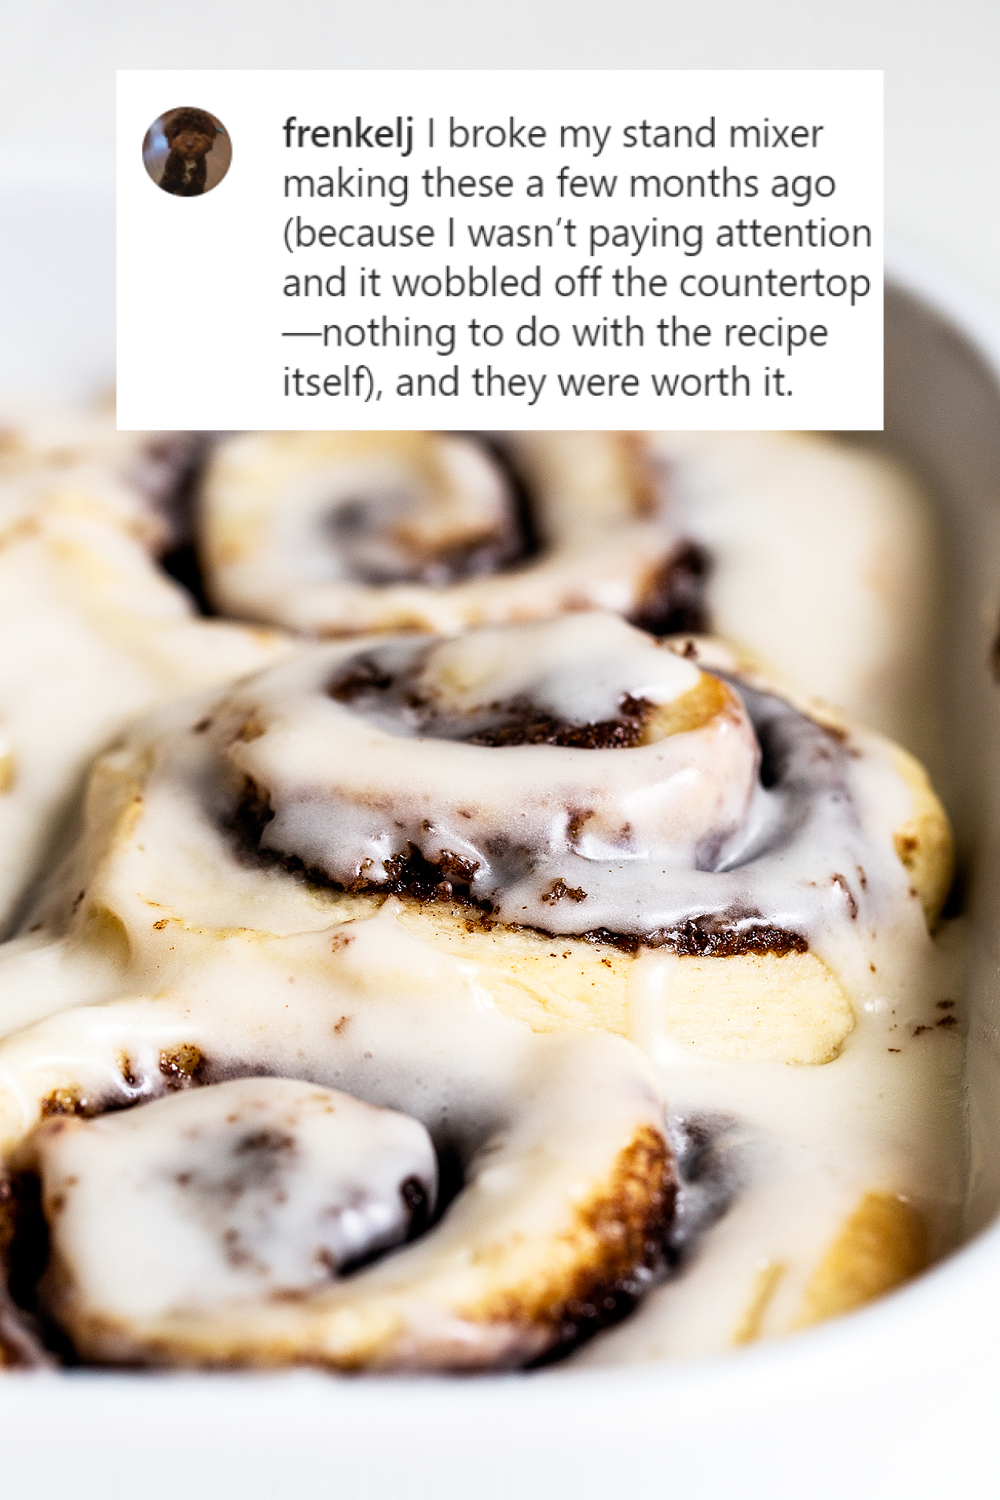 replicate the delicious aroma of fresh cinnamon rolls baking on Christmas morning, but for Christmas in July!